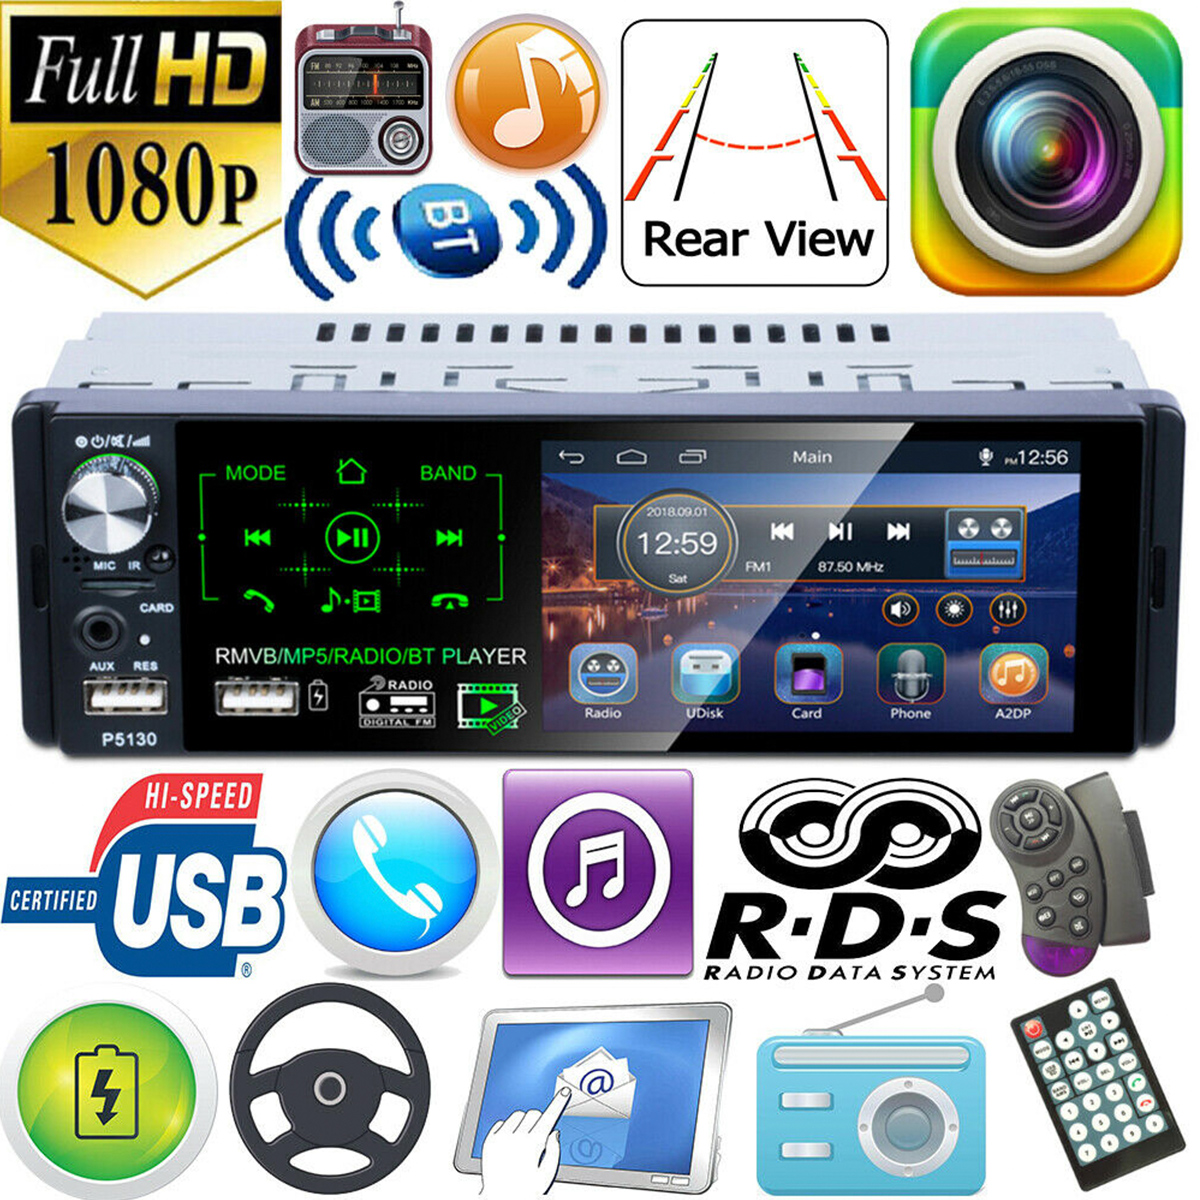 P5130-41-Inch-1-DIN-Car-Stereo-Radio-MP5-Player-Full-Touch-Screen-FM-AM-RDS-bluetooth-USB-Strong-Bas-1649564-1